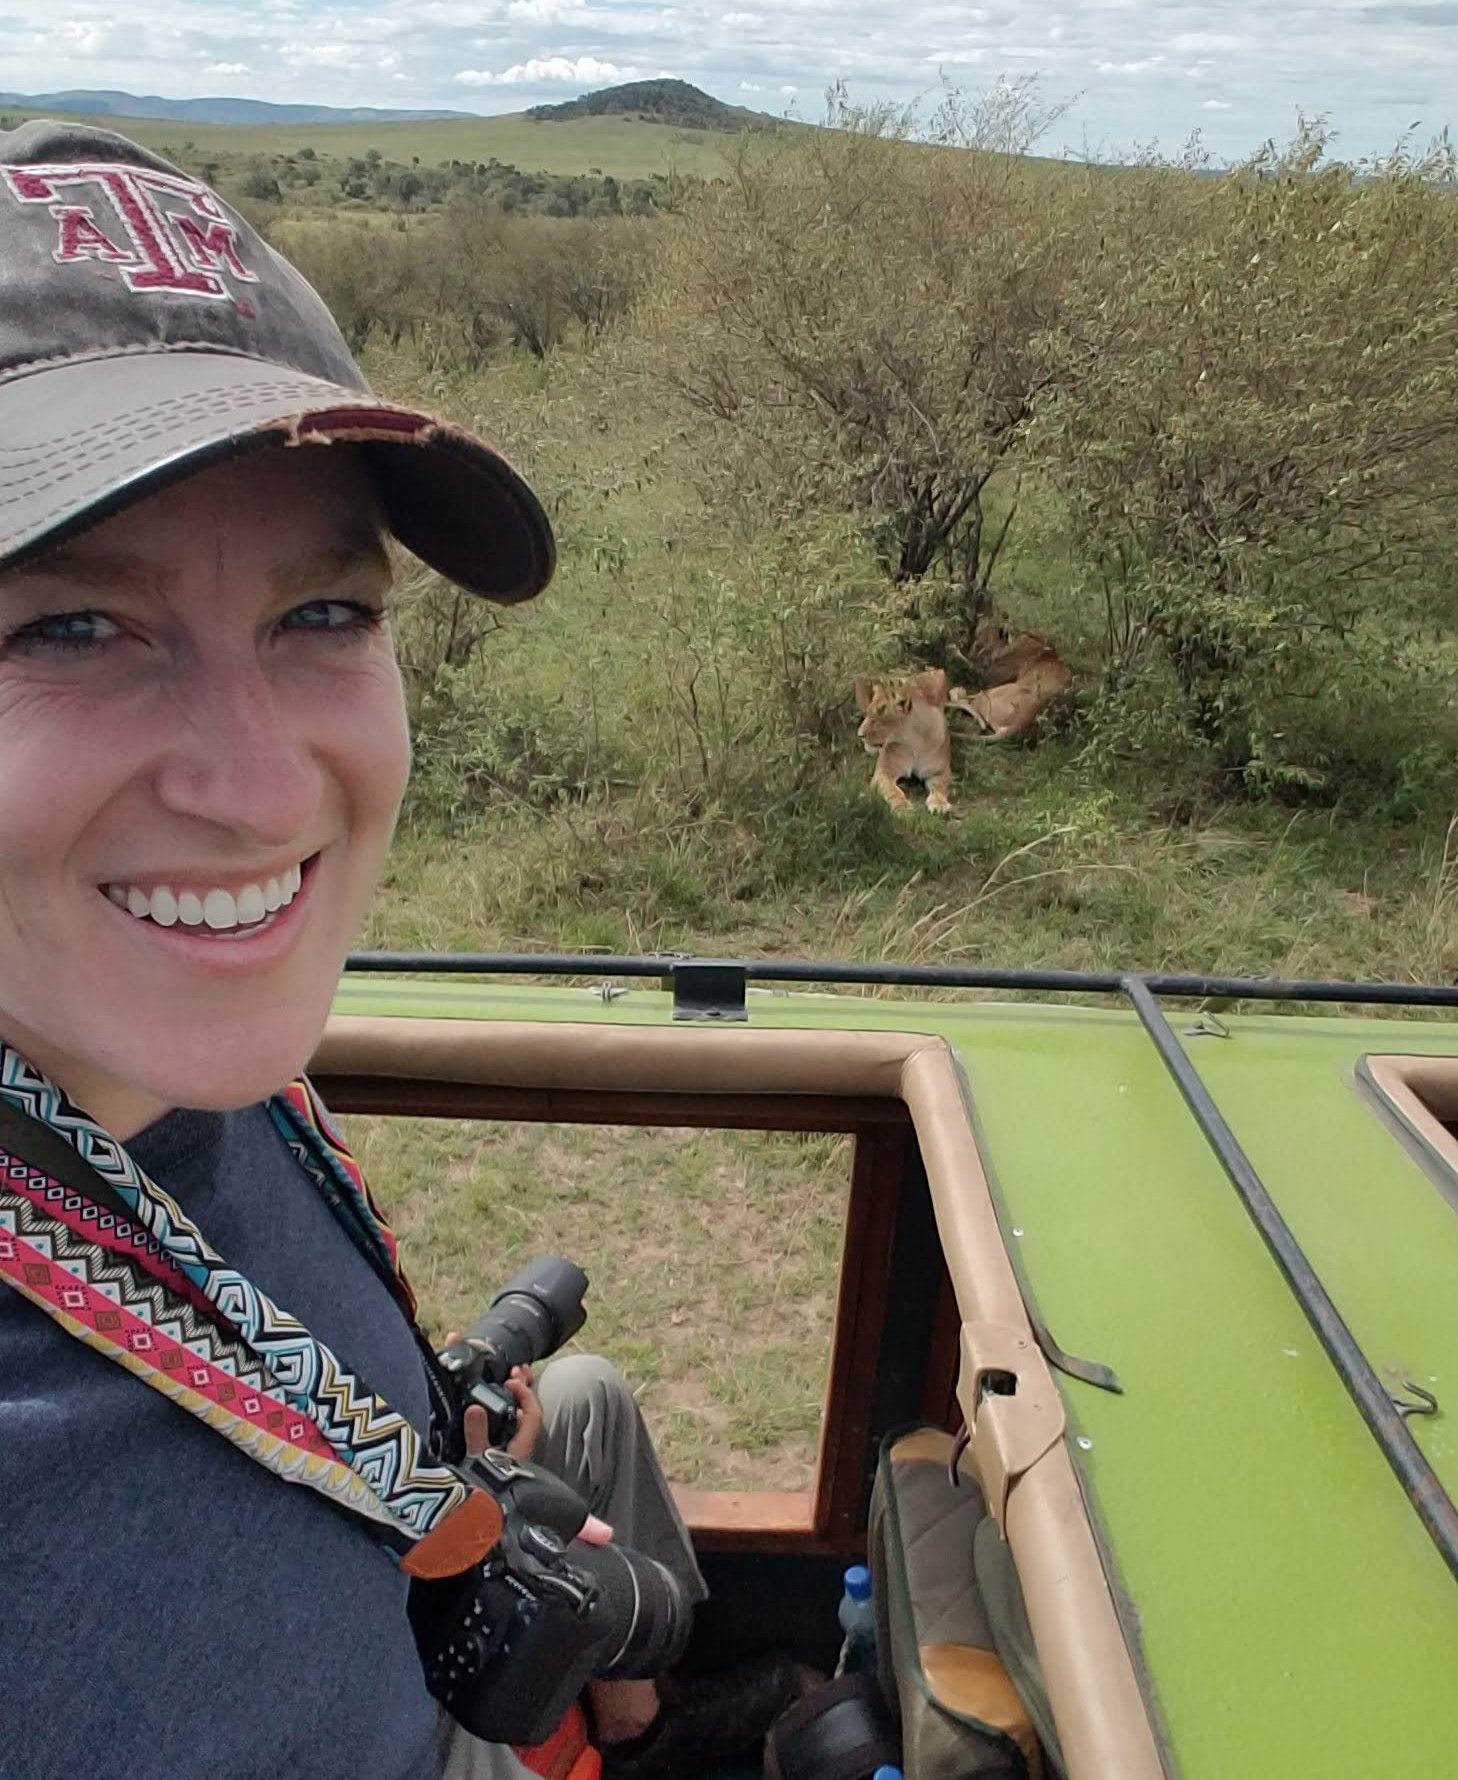 Dr Curry stands in the foreground in an open top vehicle with a lioness laying down under some scrub bushes in the background.